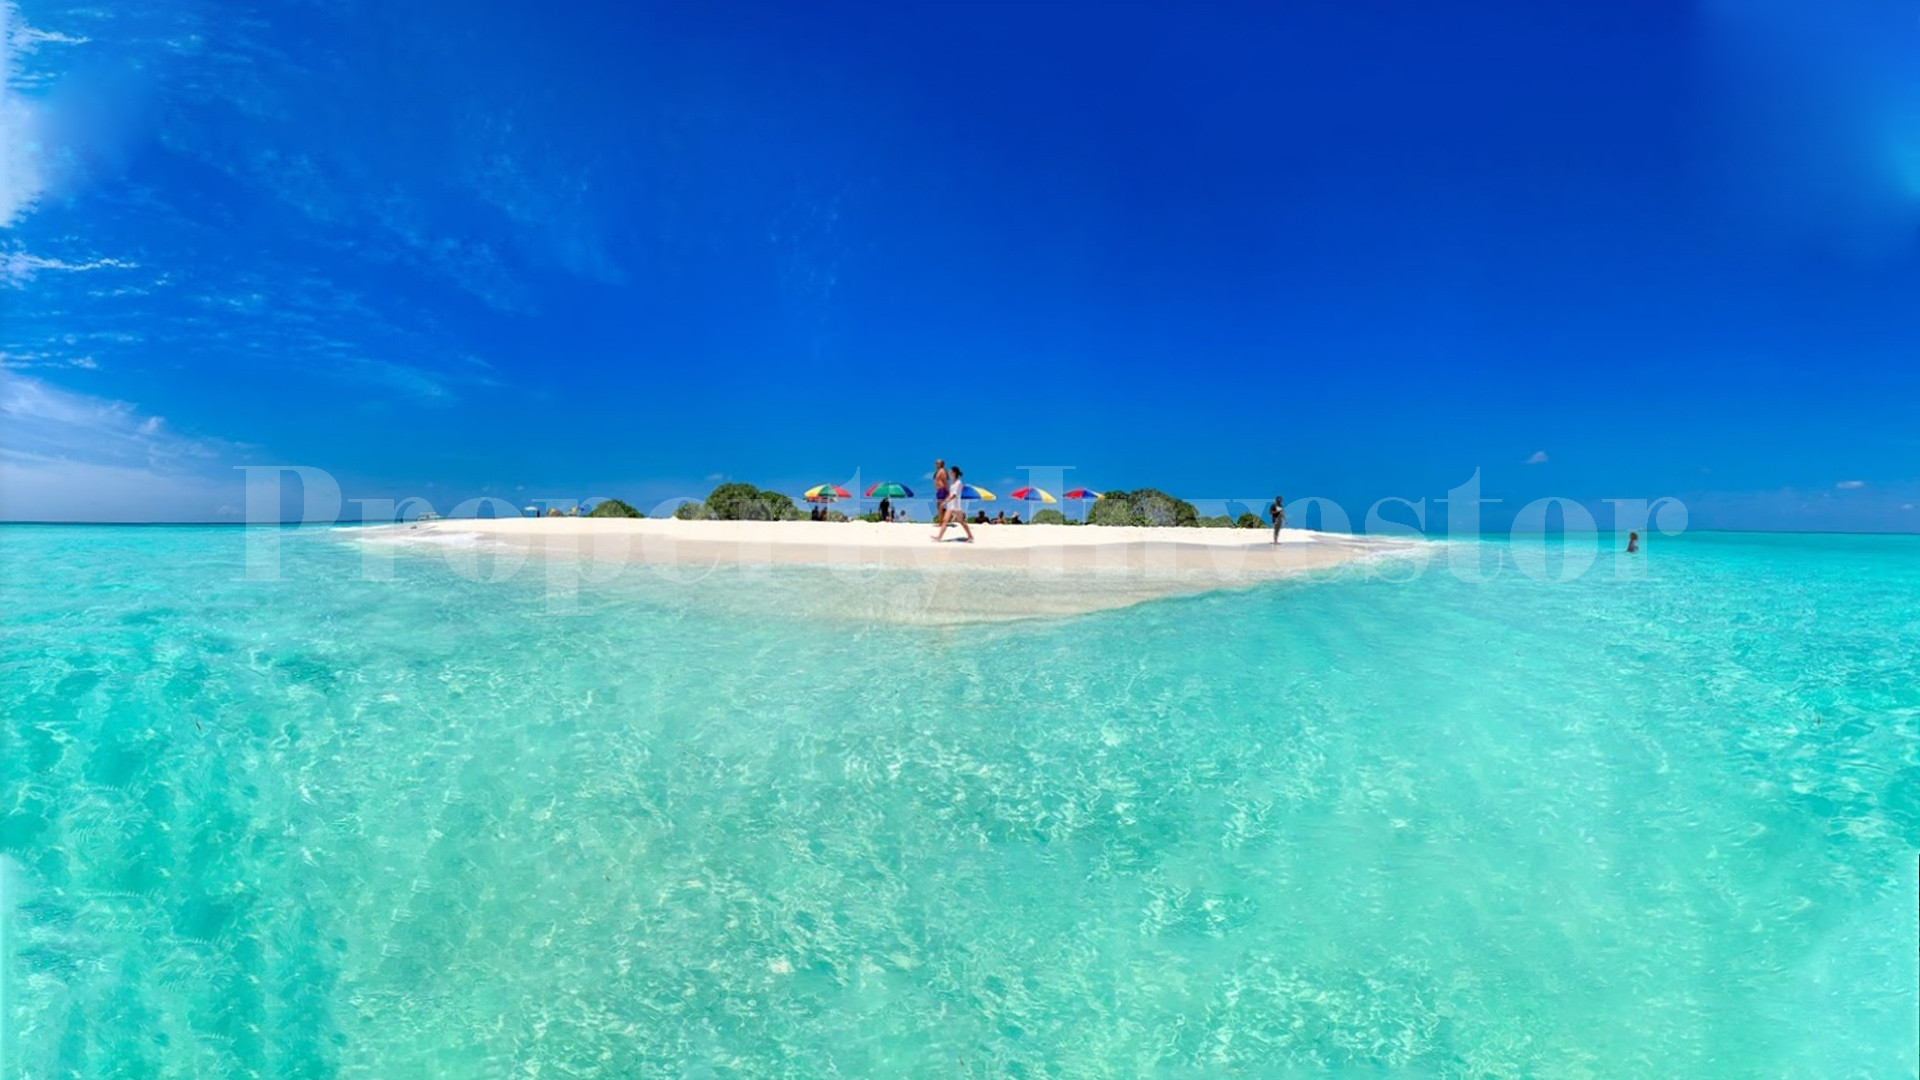 Expansive 80 Hectare Lagoon for Commercial Development for Sale in the Maldives